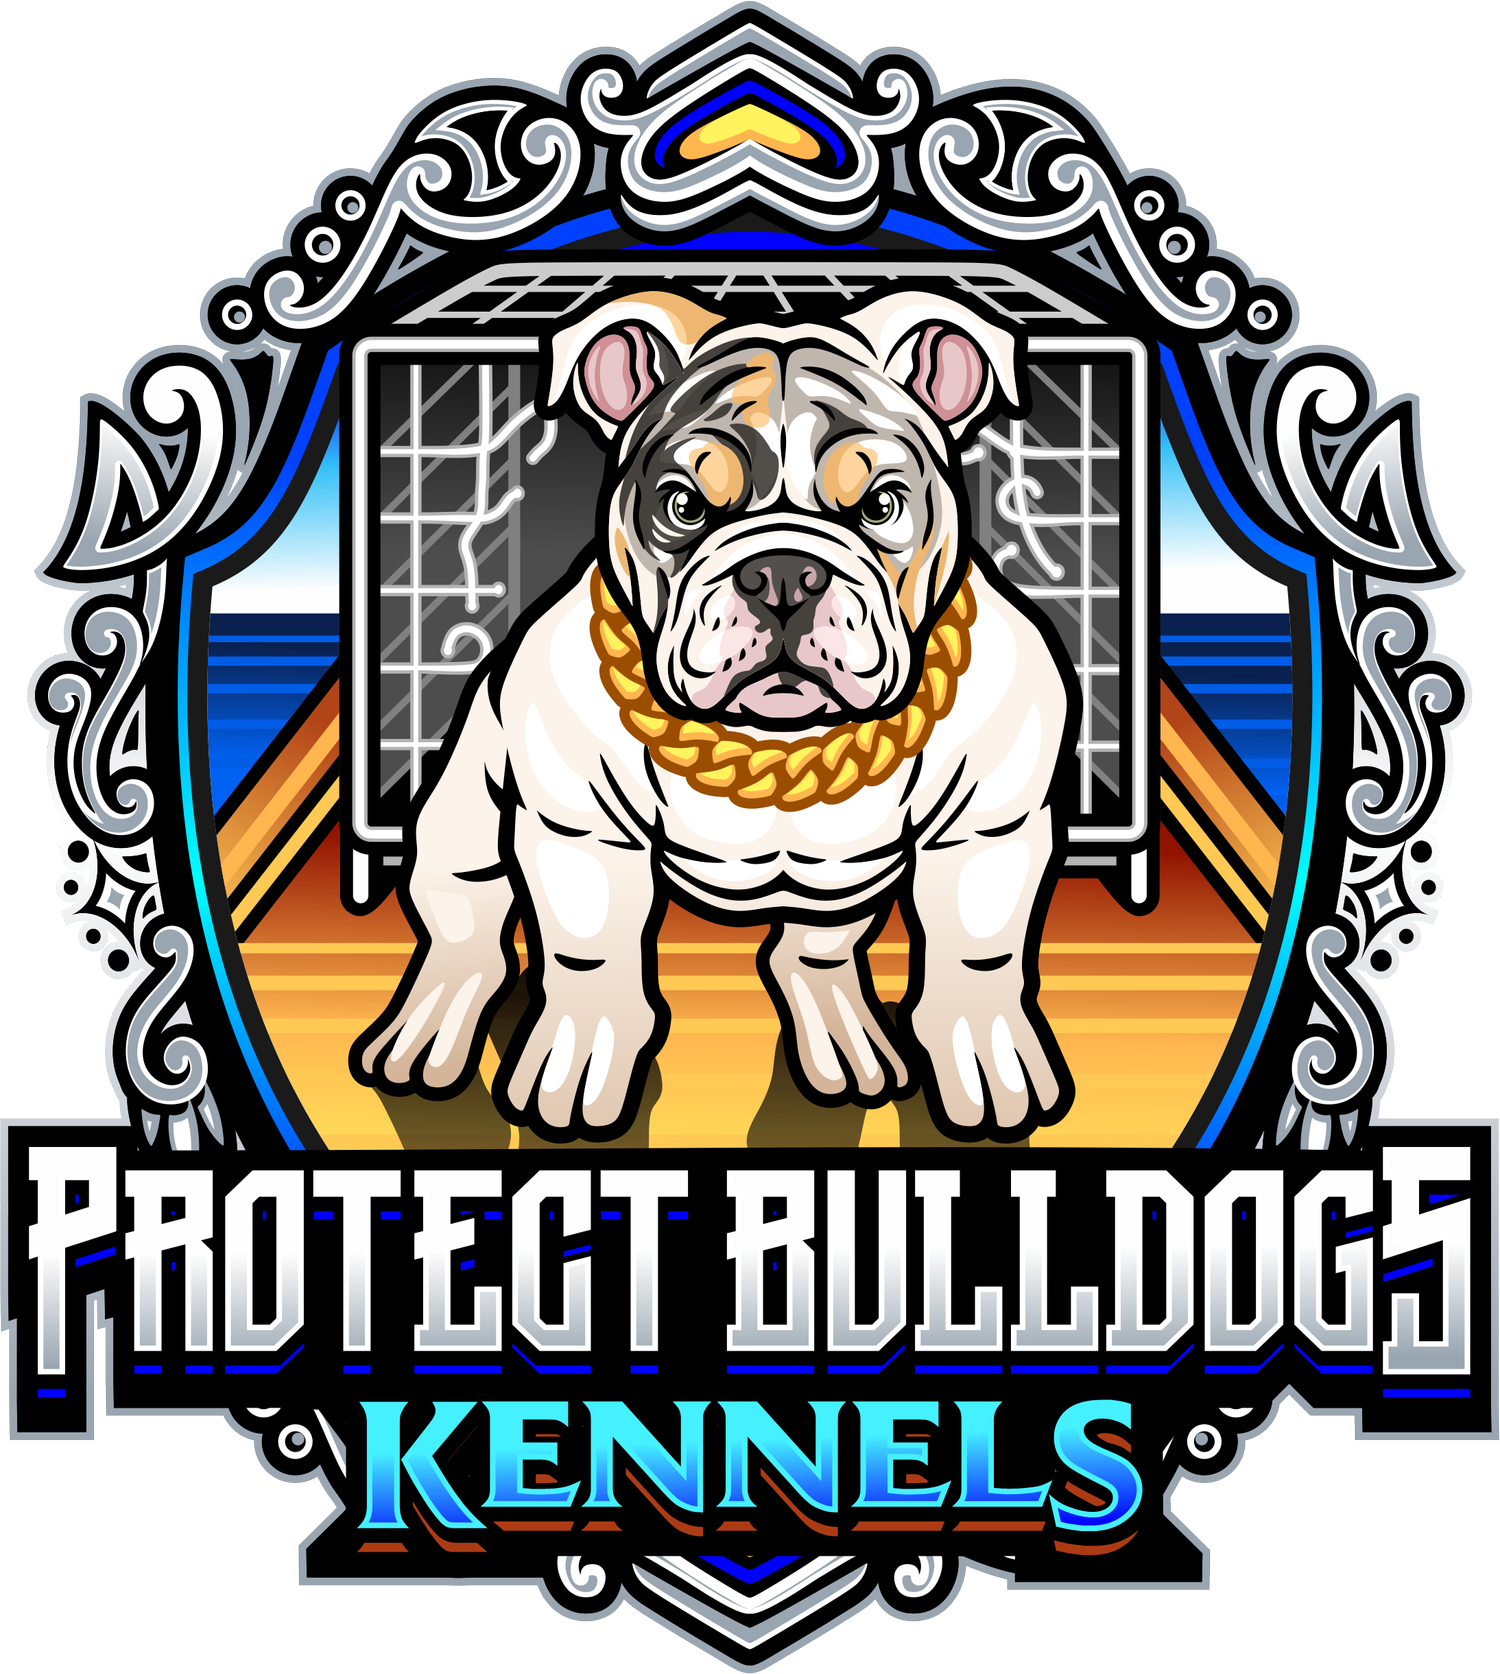 Protect Bulldogs Kennels